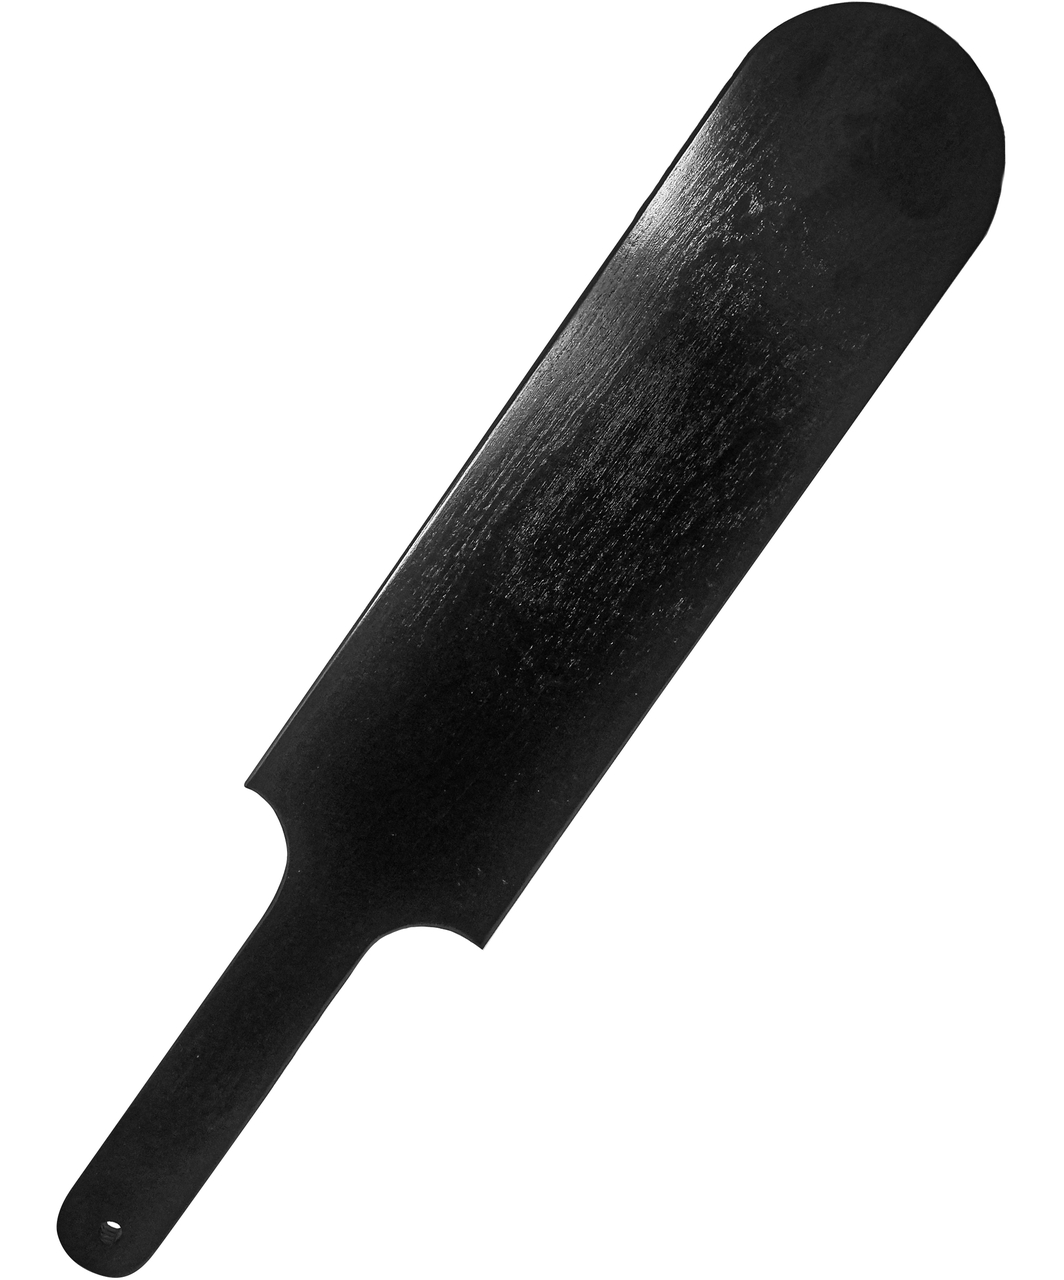 SexyStyle black wooden paddle